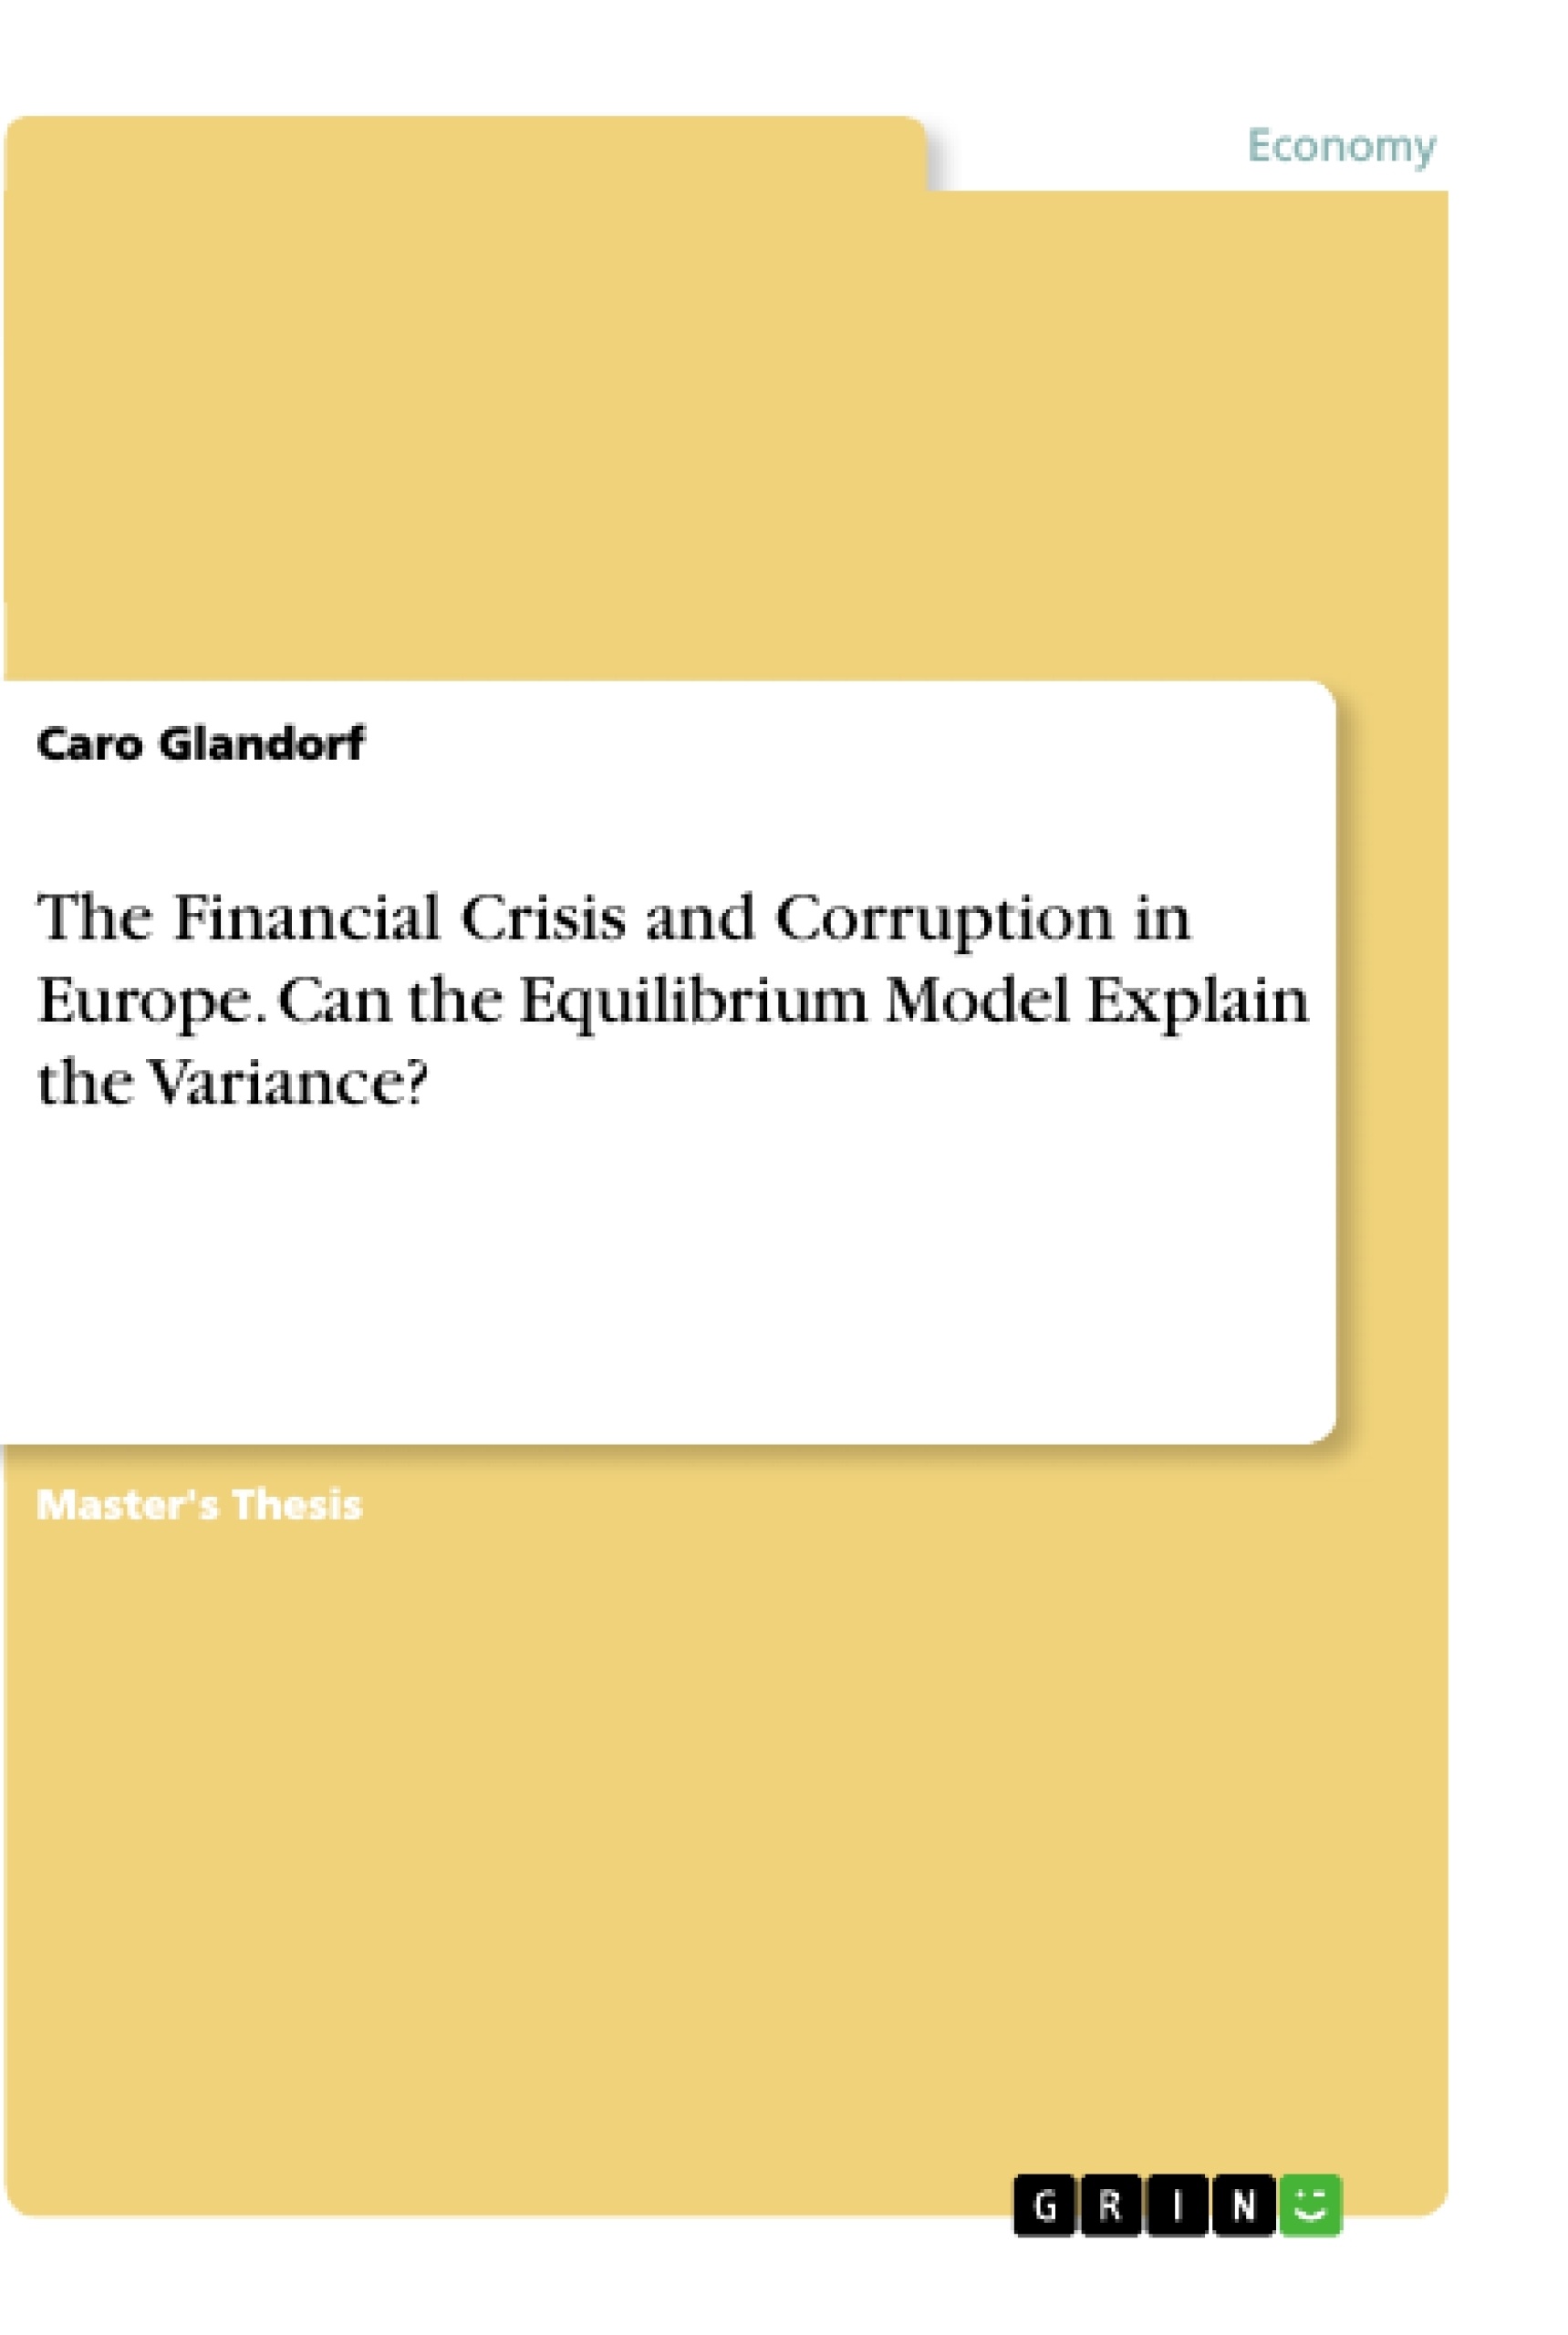 Title: The Financial Crisis and Corruption in Europe. Can the Equilibrium Model Explain the Variance?